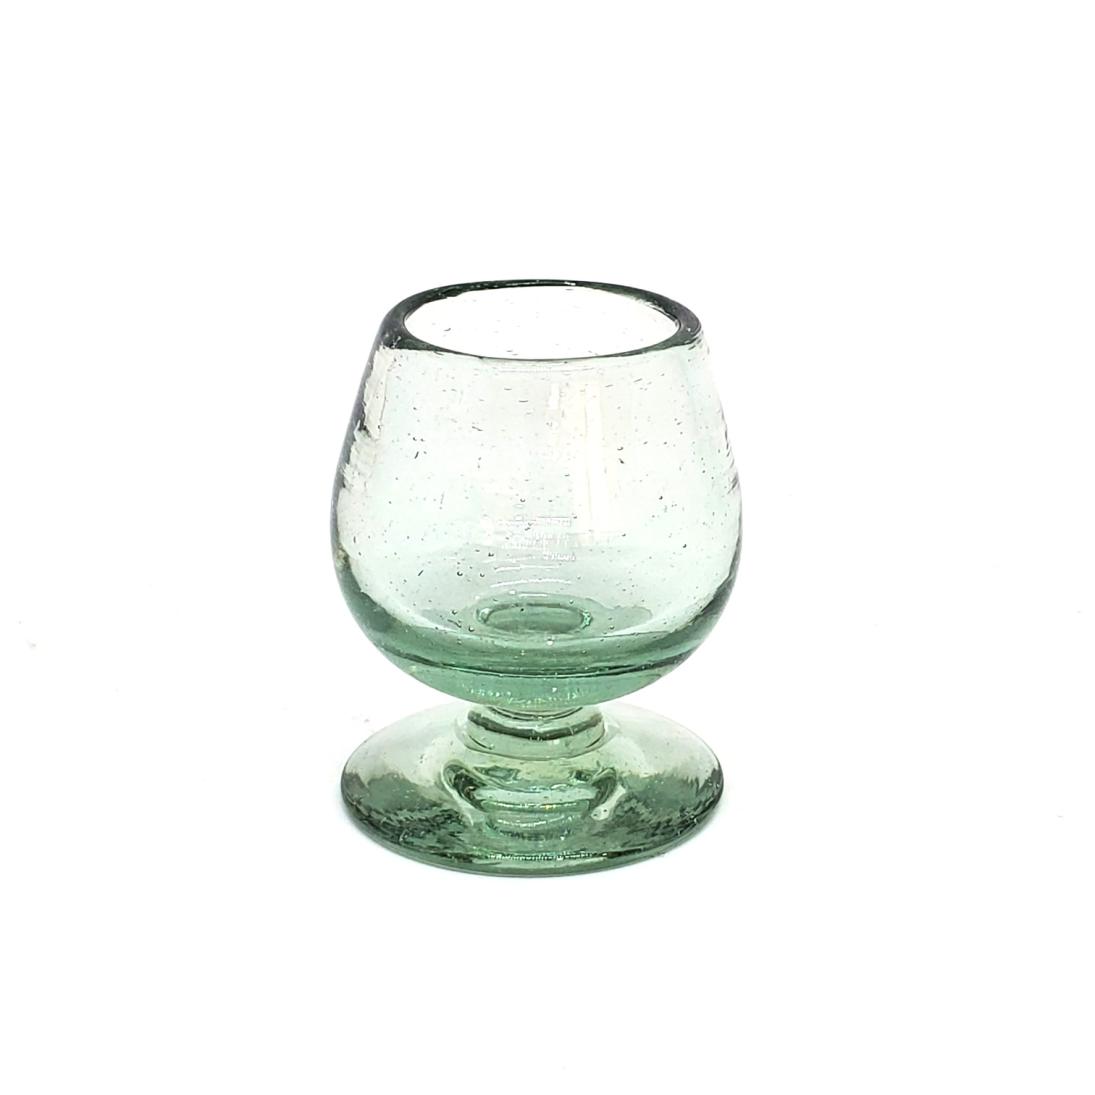 Sale Items / Clear 2.5 oz Tequila Sippers   / Sip your favourite tequila or mezcal with these iconic clear handcrafted sipping glasses. You may also serve lemon juice or other chasers.